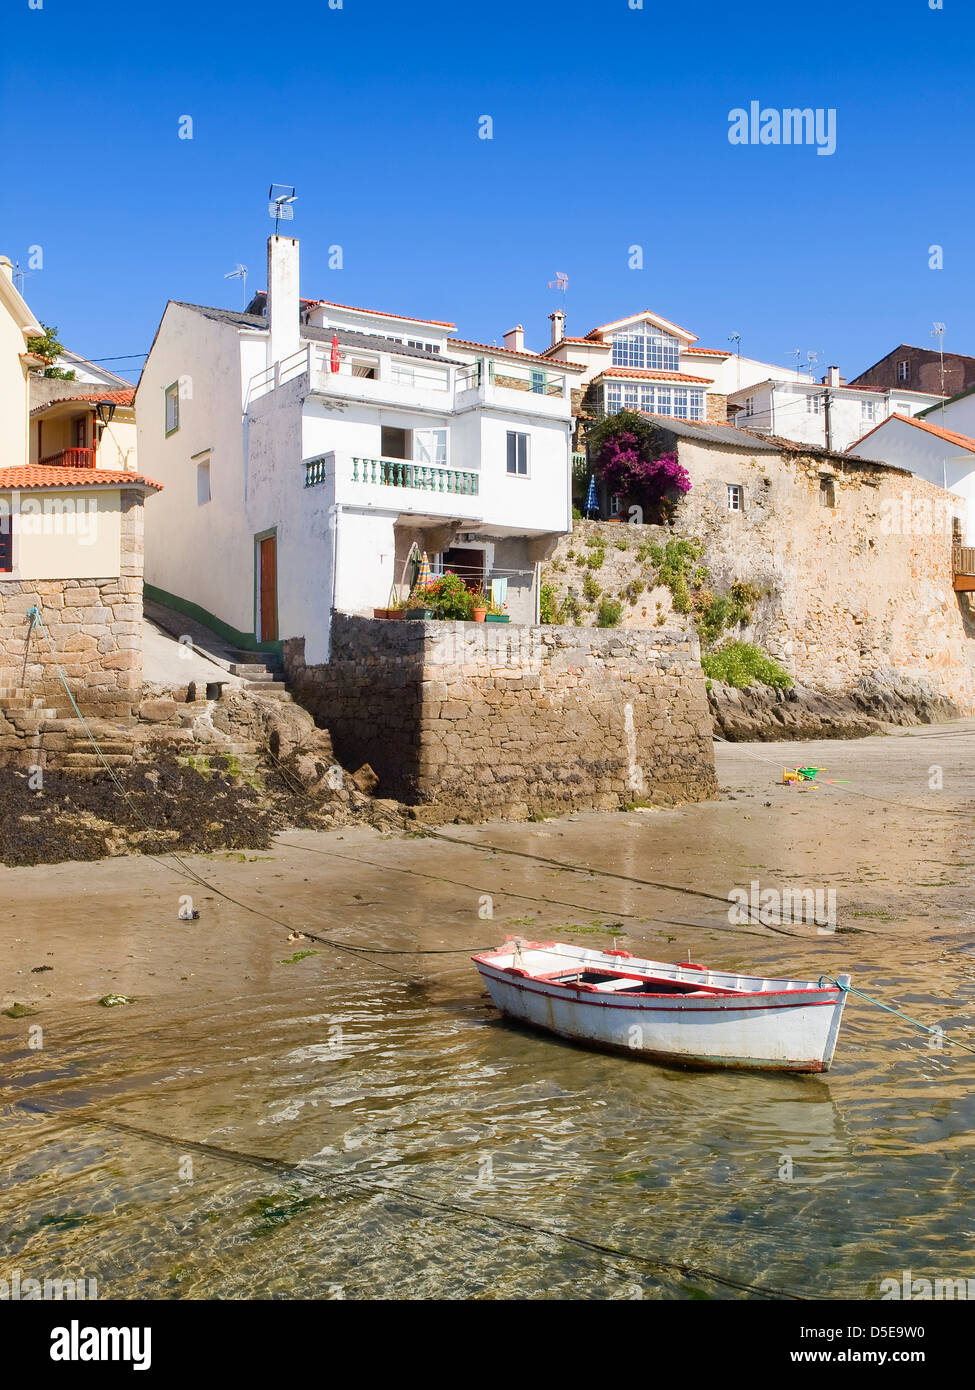 Houses on the sea shore with a boat in the foreground. The photo is taken in a fishing village called 'Redes', in Galicia, Spain Stock Photo